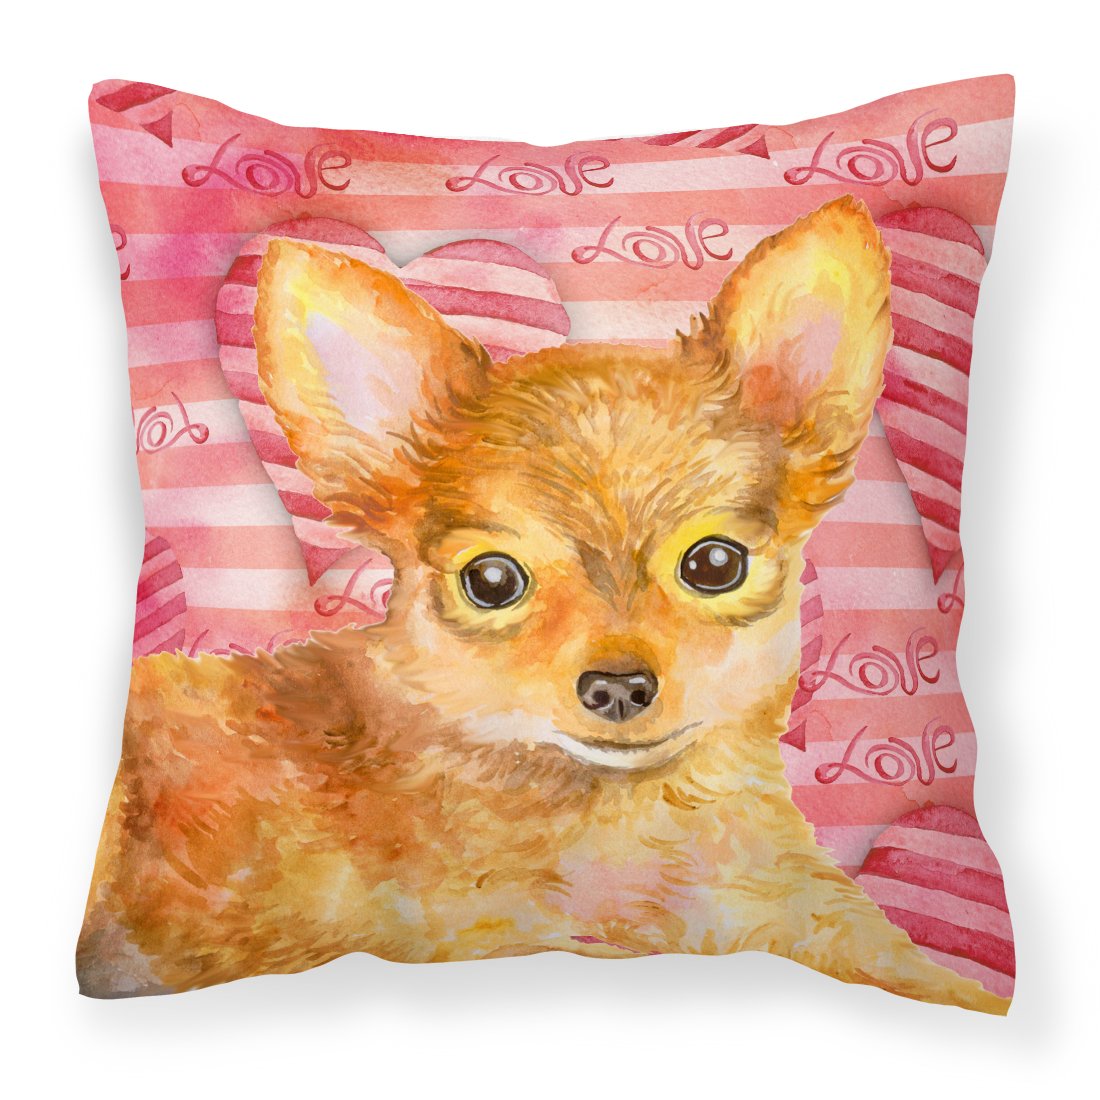 Toy Terrier Love Fabric Decorative Pillow BB9809PW1818 by Caroline's Treasures